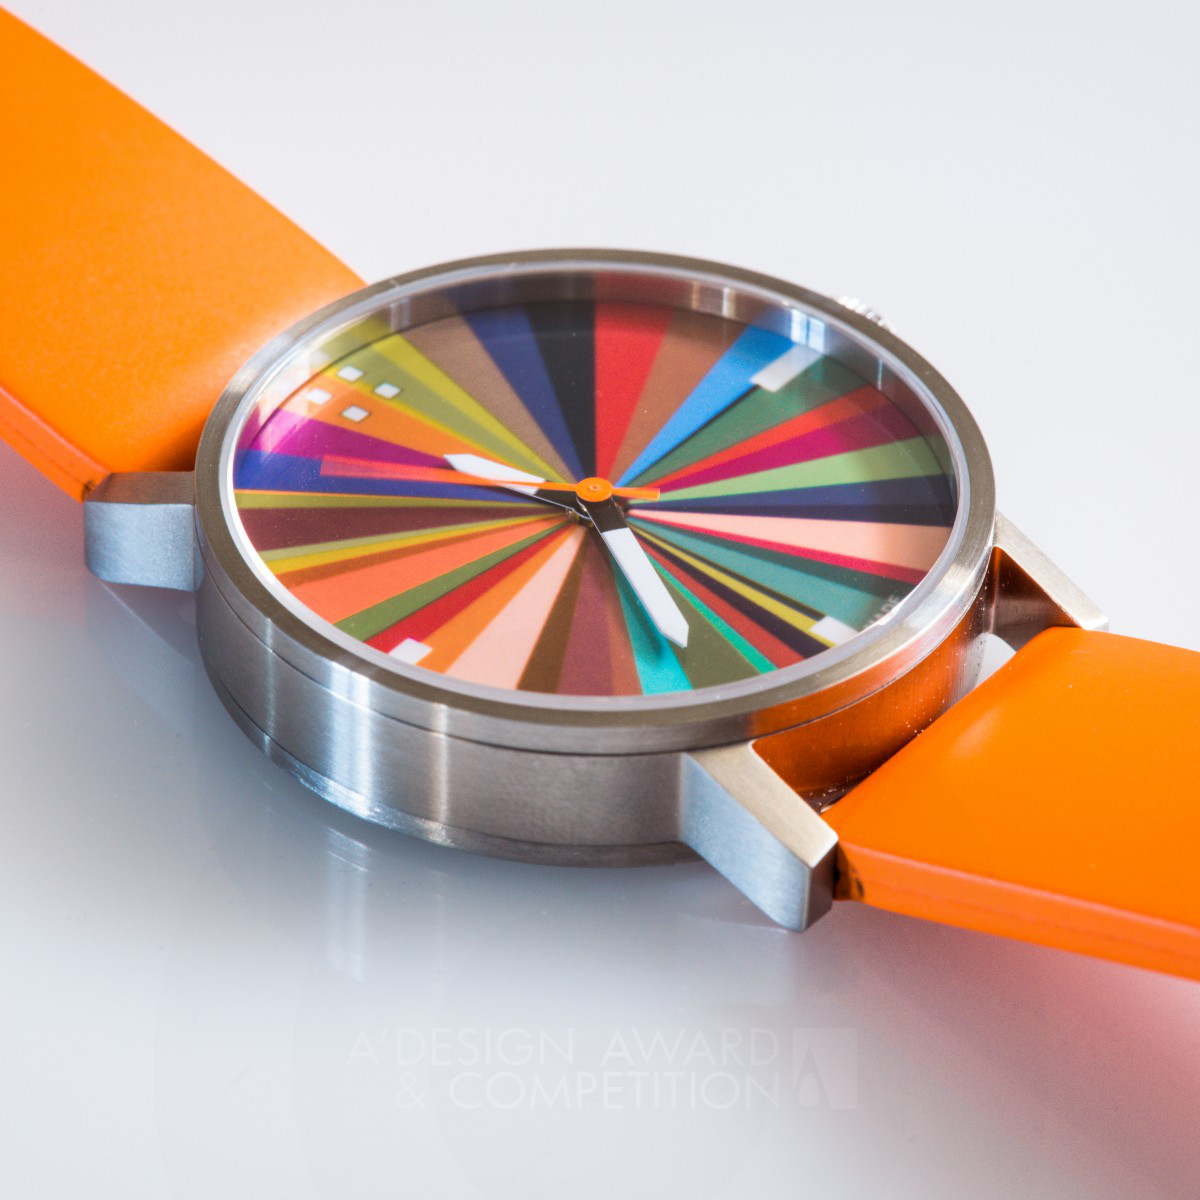 Concentric Wristwatch by Daniel Schulthess